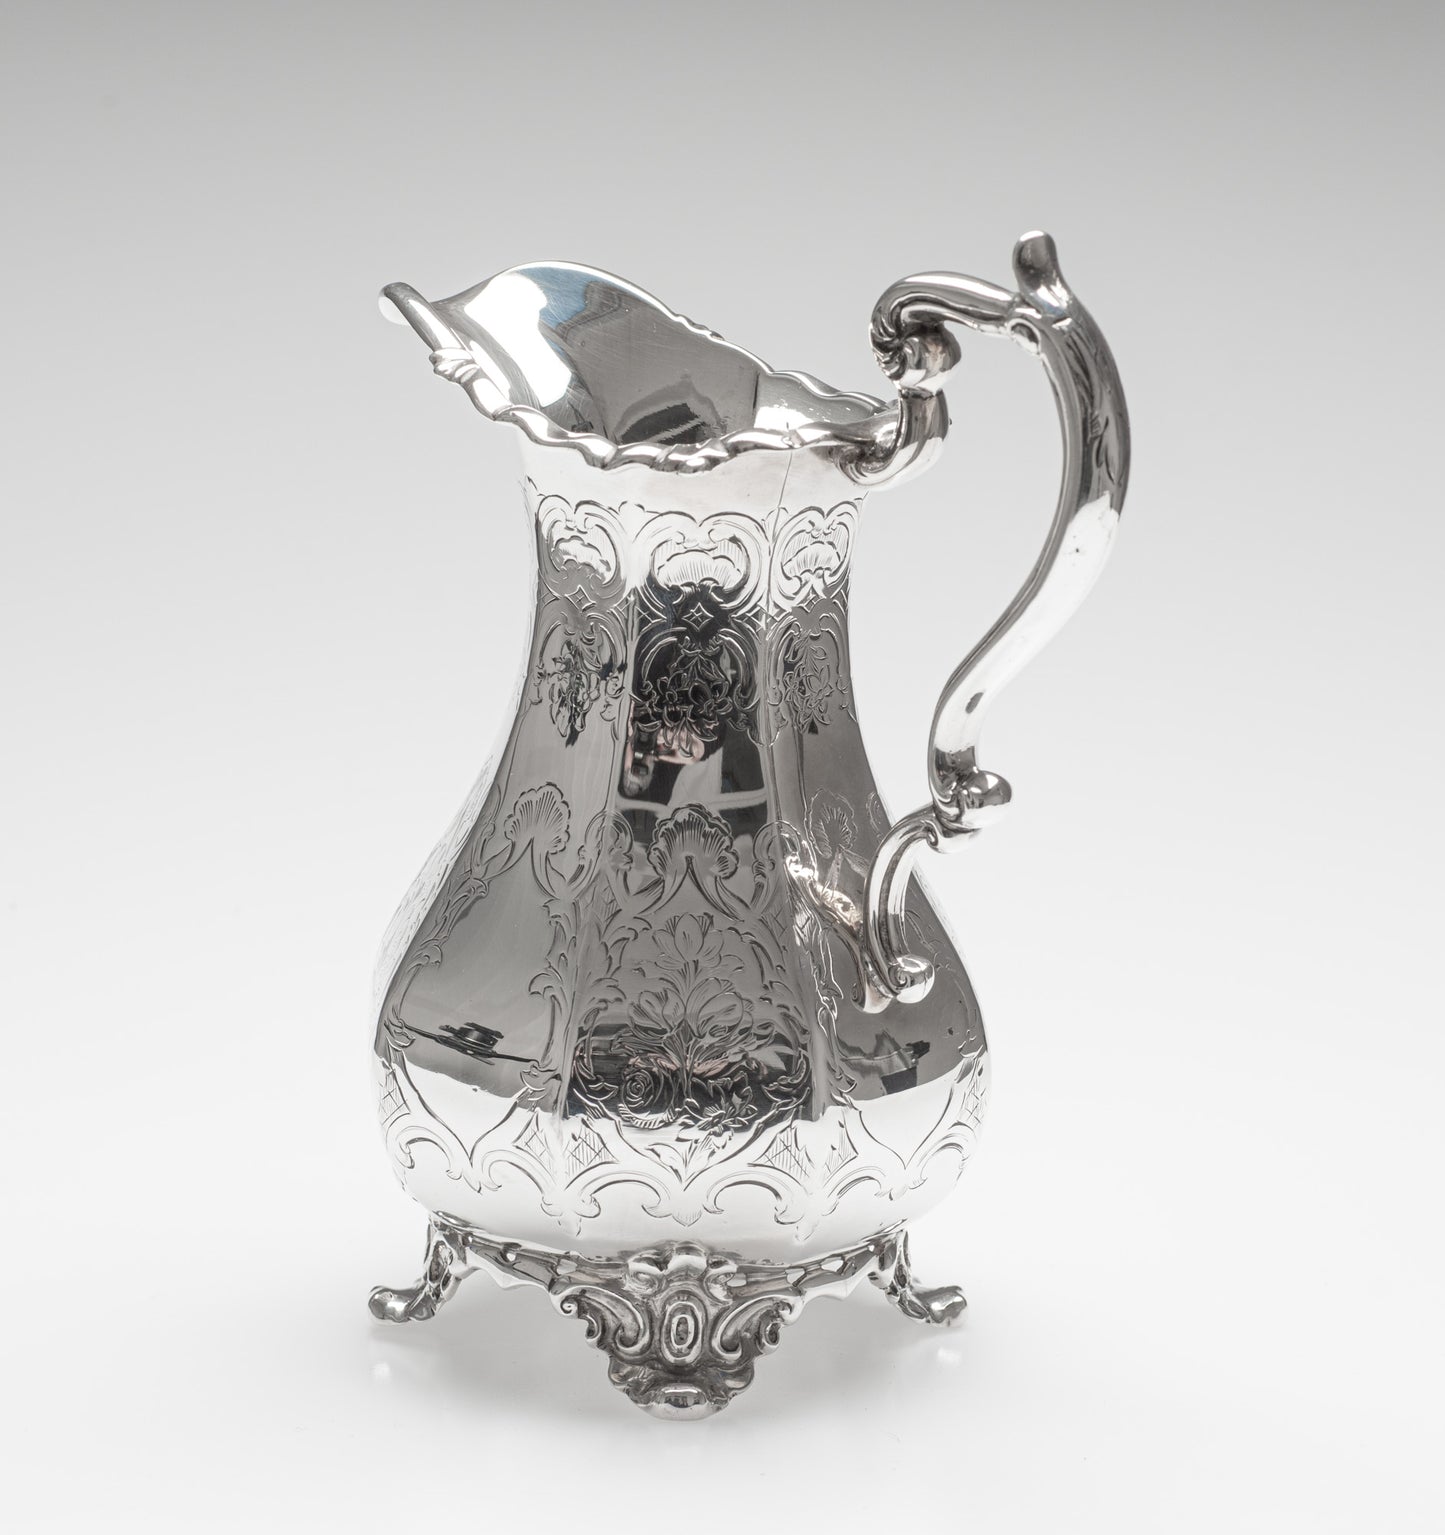 Antique Early Victorian Solid Silver Milk Jug with Chased Design, London 1851 (Code 2386)